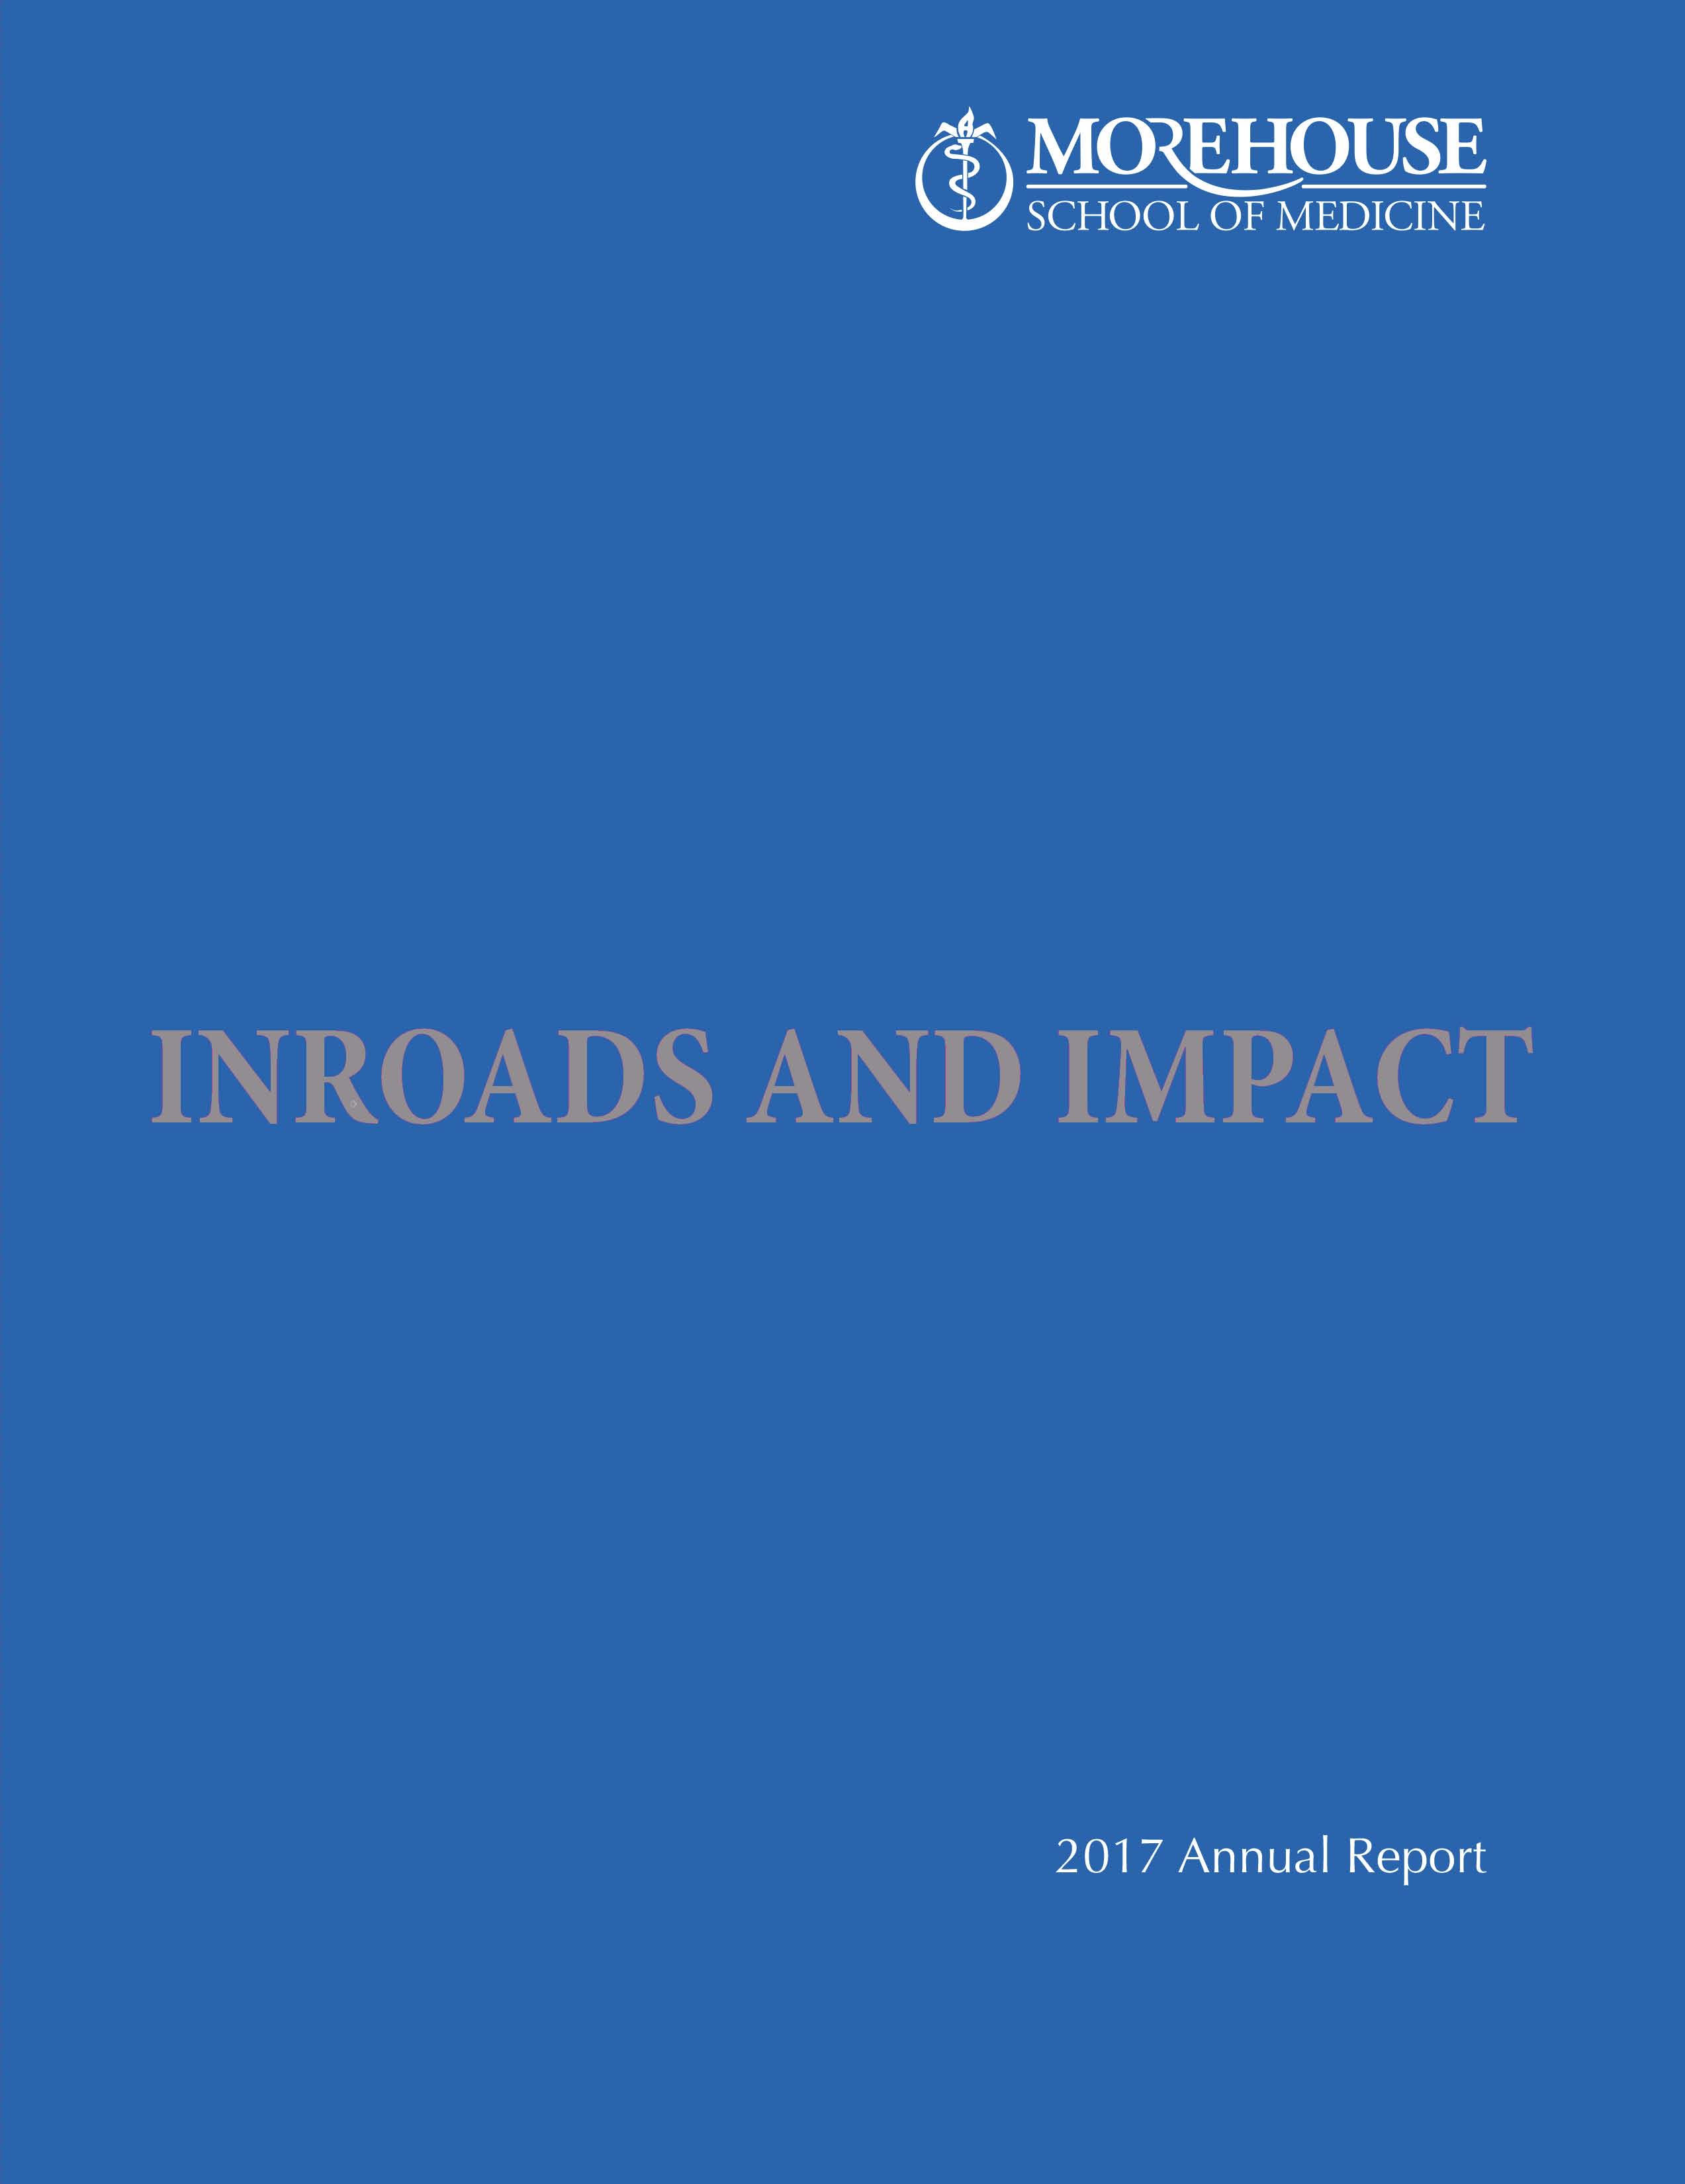 MSM 2017 Annual Report Cover